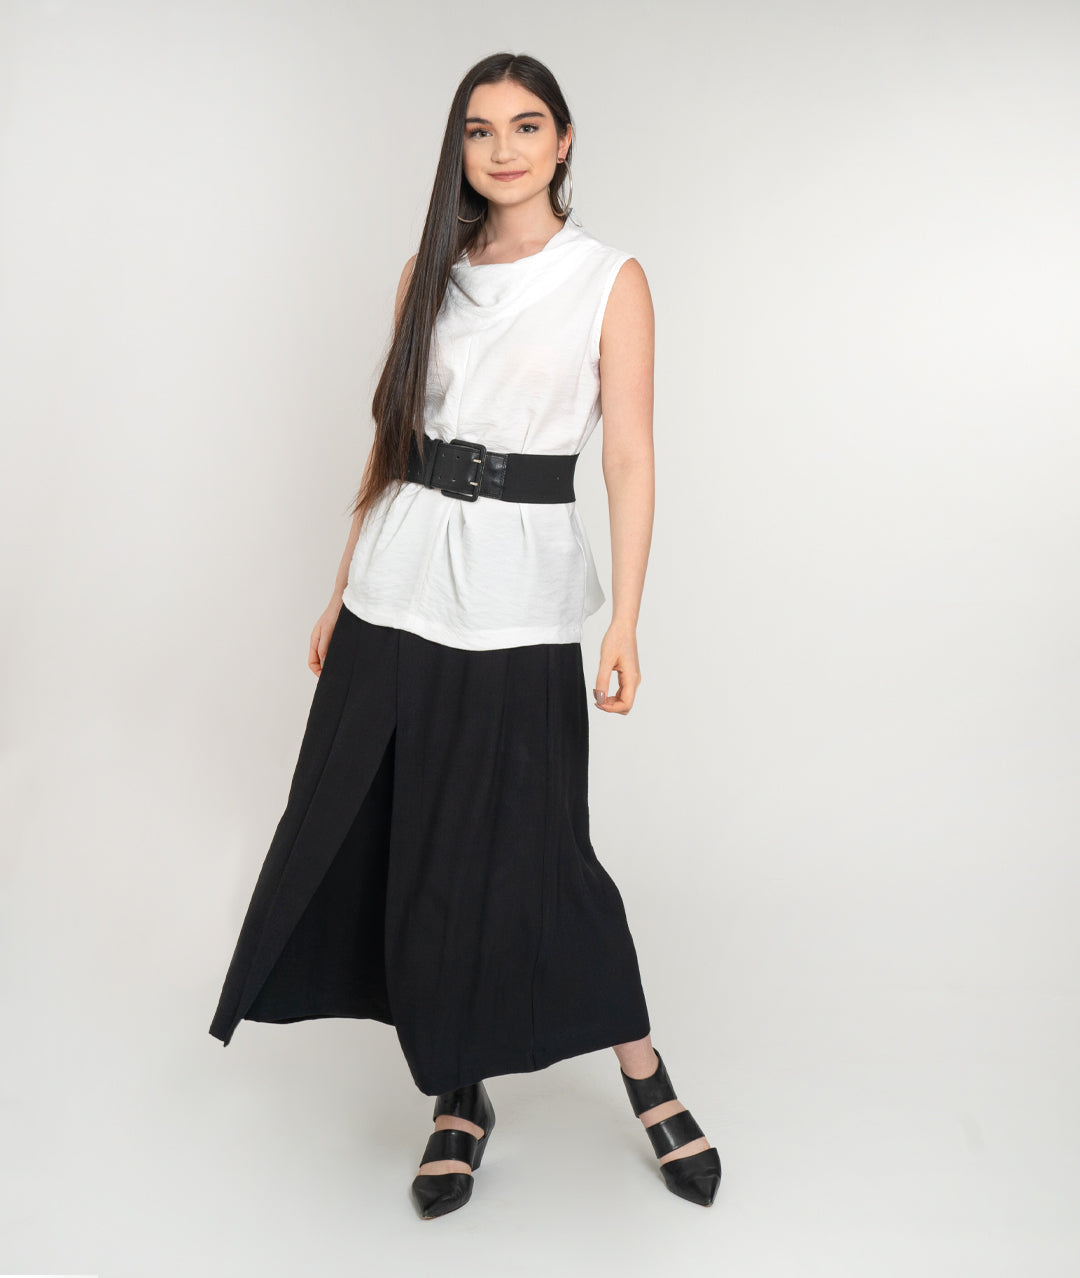 model in a sleeveless white tank with a cowl neck and black belt, worn over a wide leg black pant with an overlapping overlay on either front